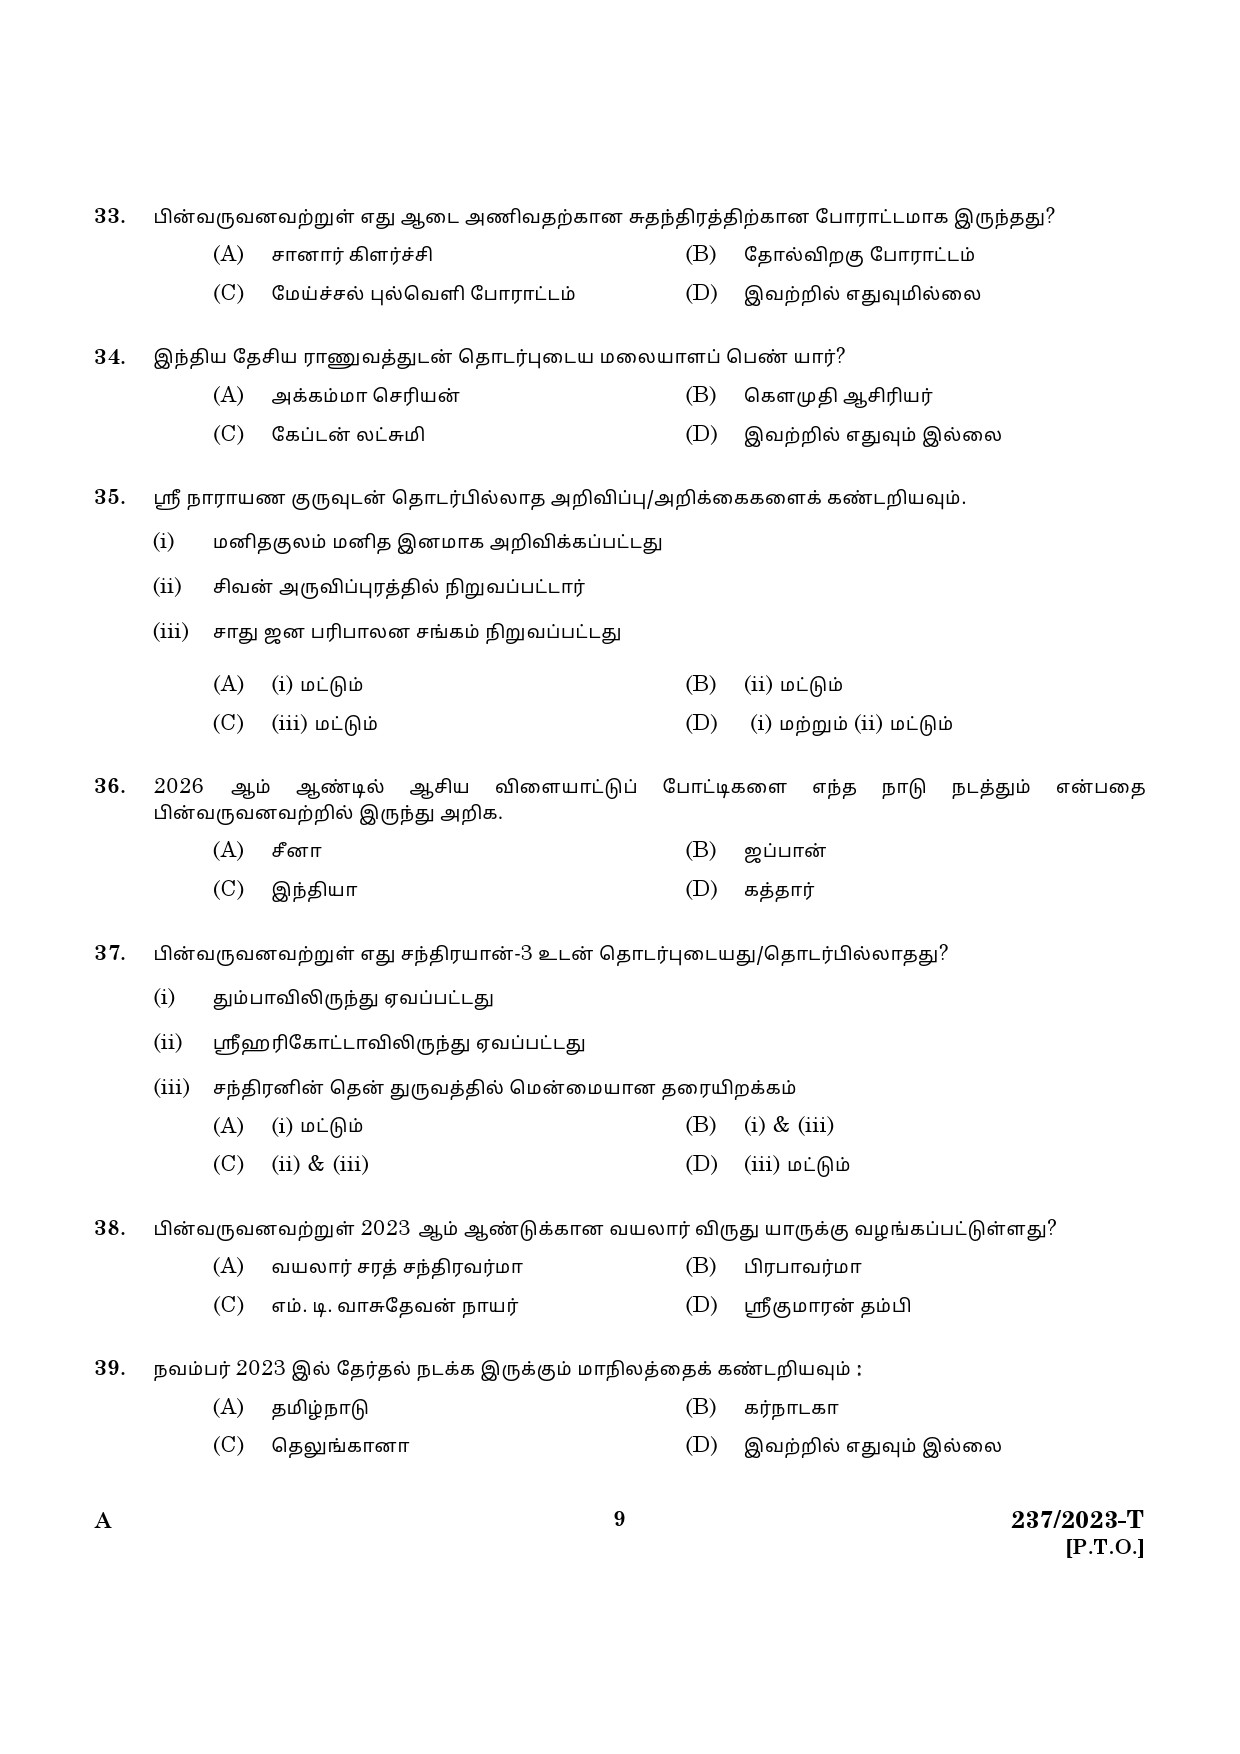 KPSC Forest Driver Tamil Exam 2023 Code 2372023 T 7